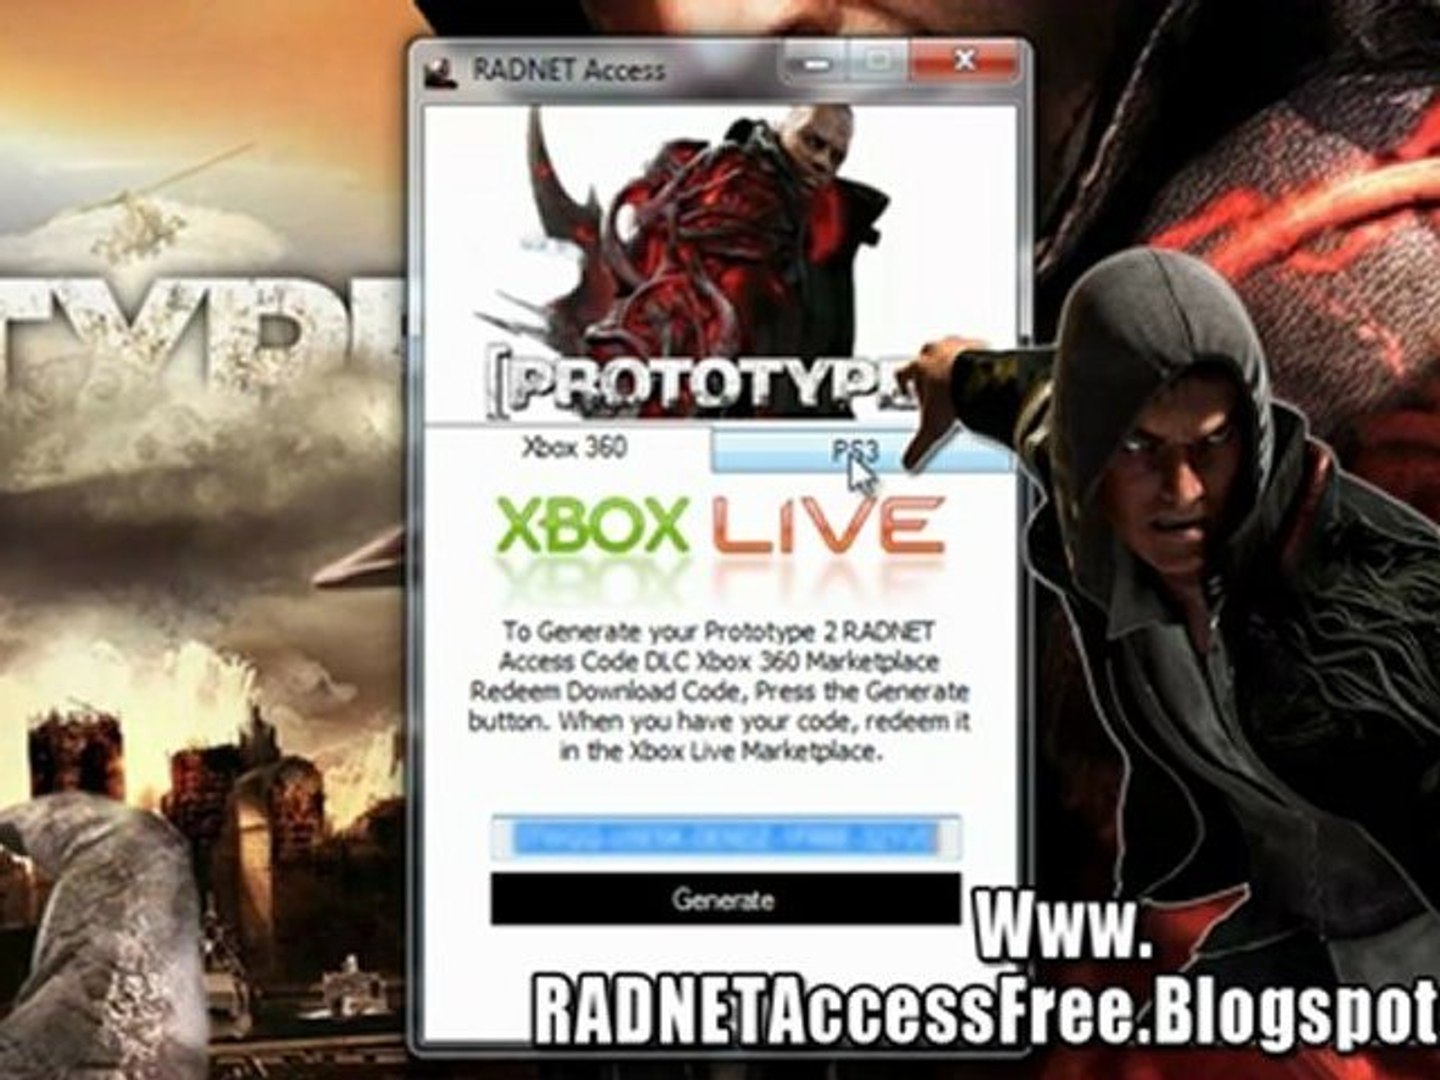 How to Get Prototype 2 RADNET Access DLC Free - video Dailymotion